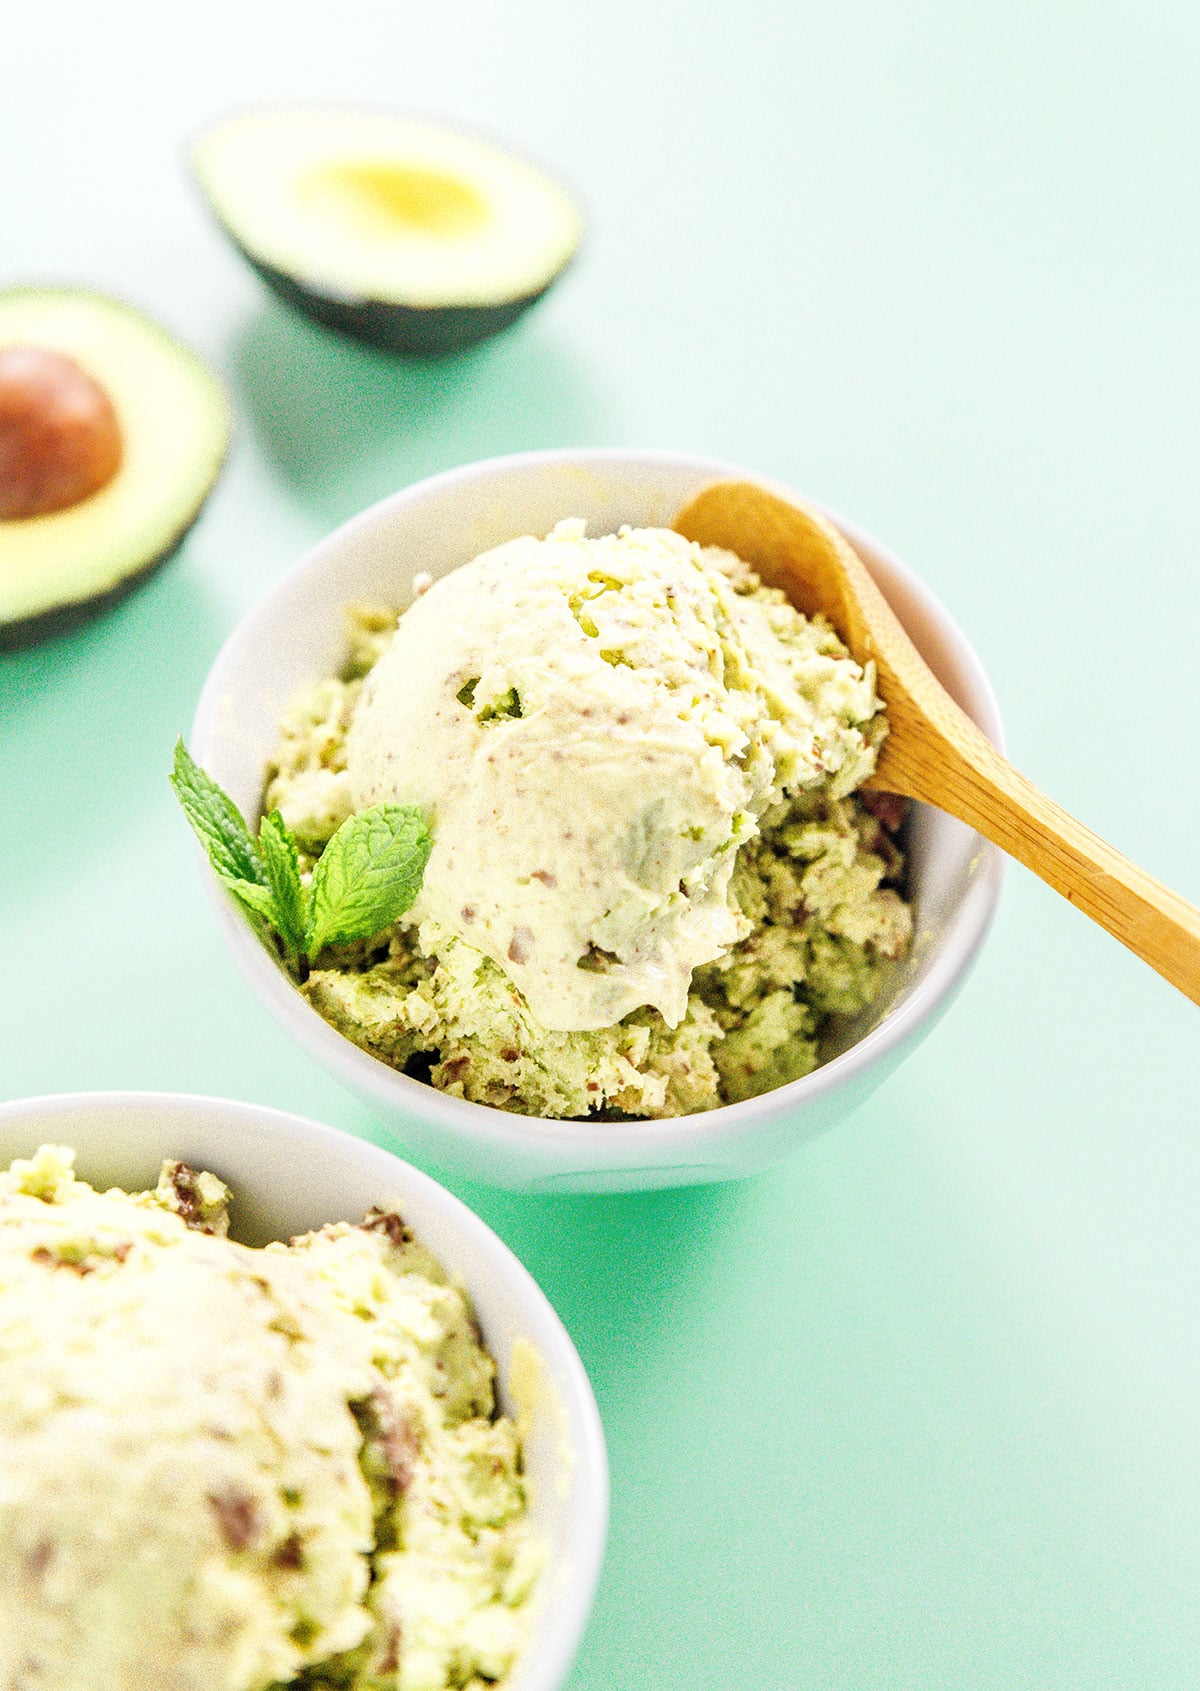 Mint chocolate avocado ice cream in a bowl with a wooden spoon.